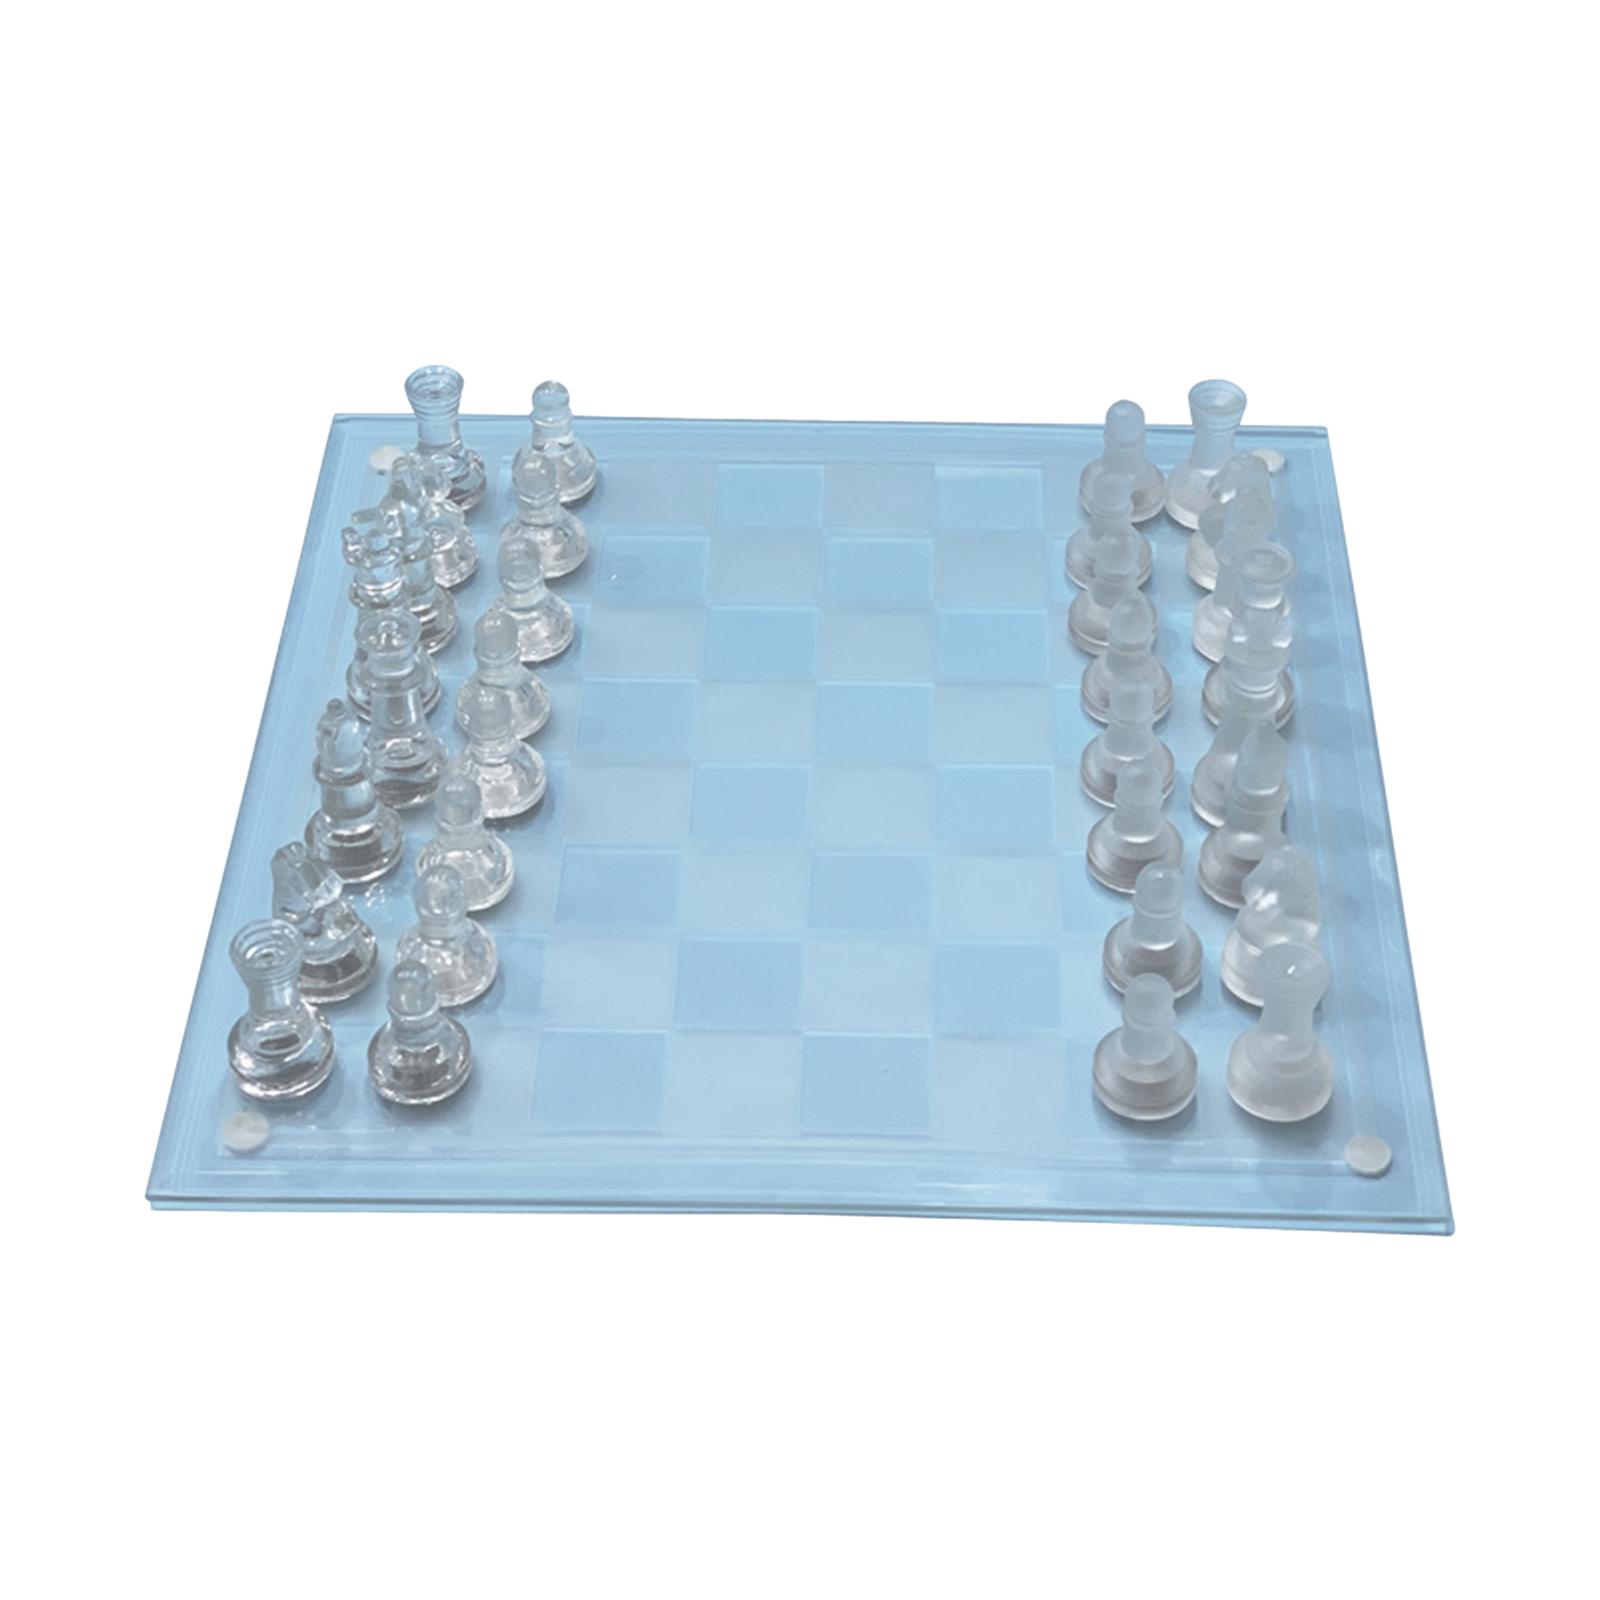 Glass Chess Game, Crystal Chess Board, Adults Play Set, Frosted Chess Board Set, Classic Strategy Game for Party, Interaction Activity Festival - image 2 of 8